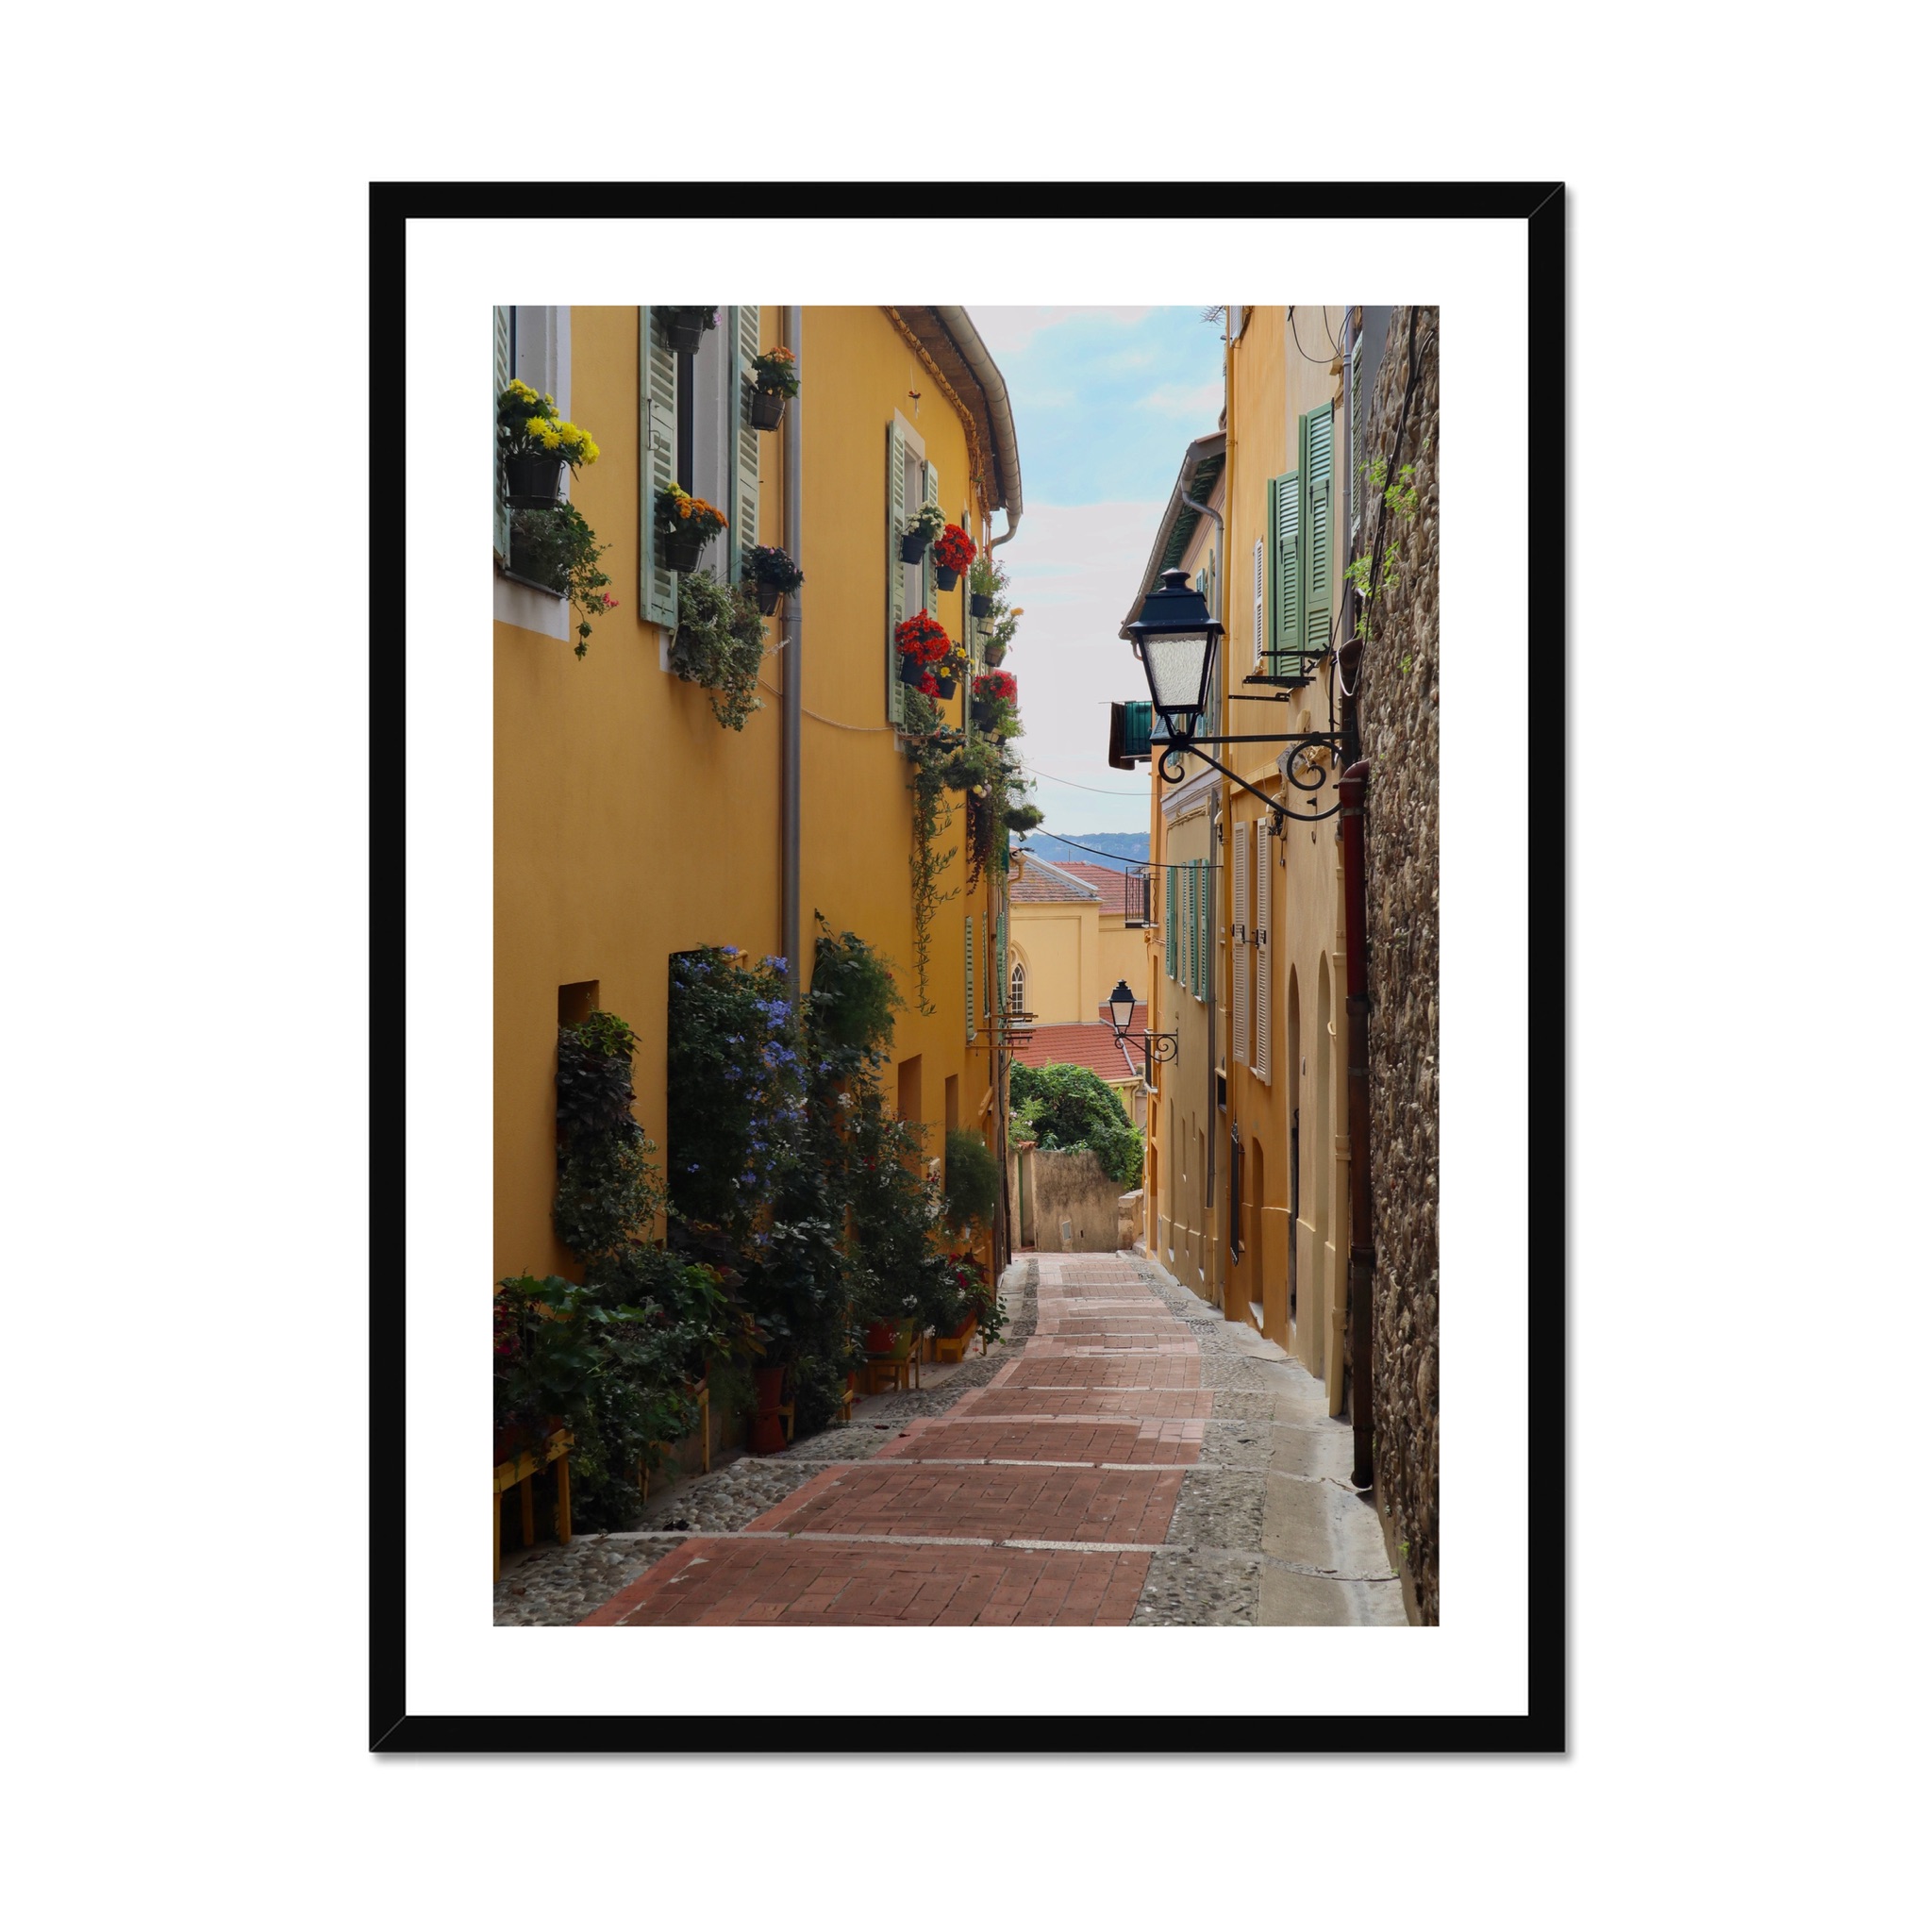 South of France Photos framed print - Village street with scooters in Saint Tropez